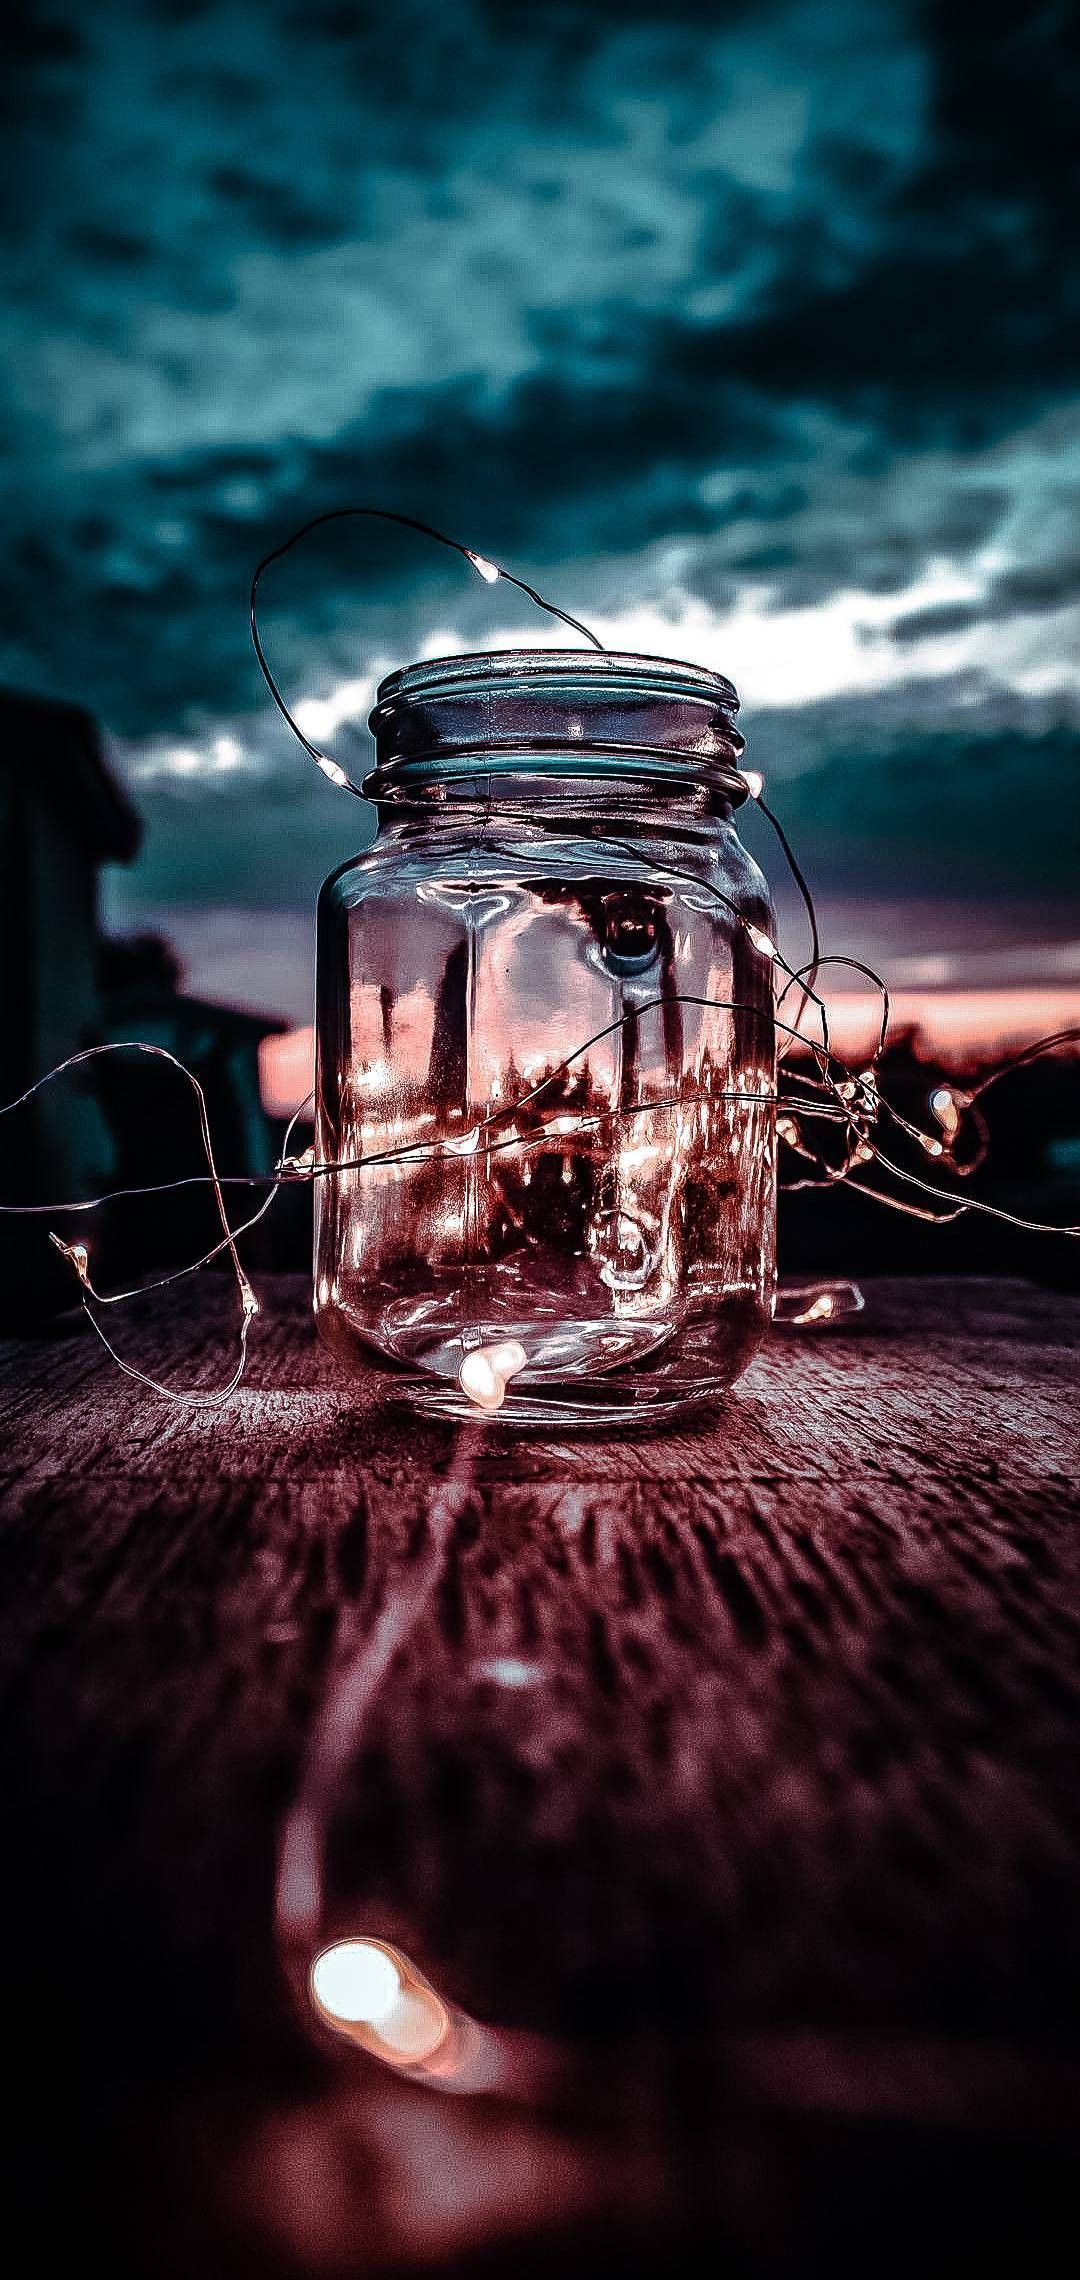 IPhone wallpaper of a jar with lights inside - Fairy lights